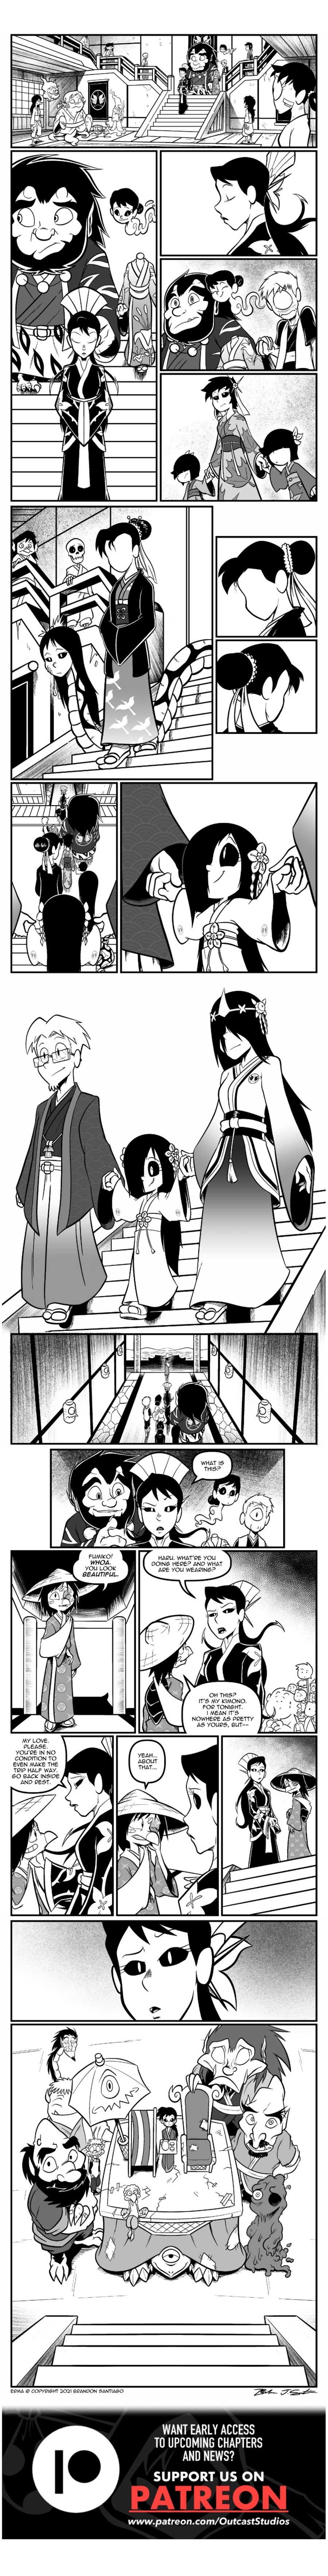 The ht Parade Part 32. .. Actually can't wait for this ark to end and maybe we can get back to cute slice of life short erma comics.